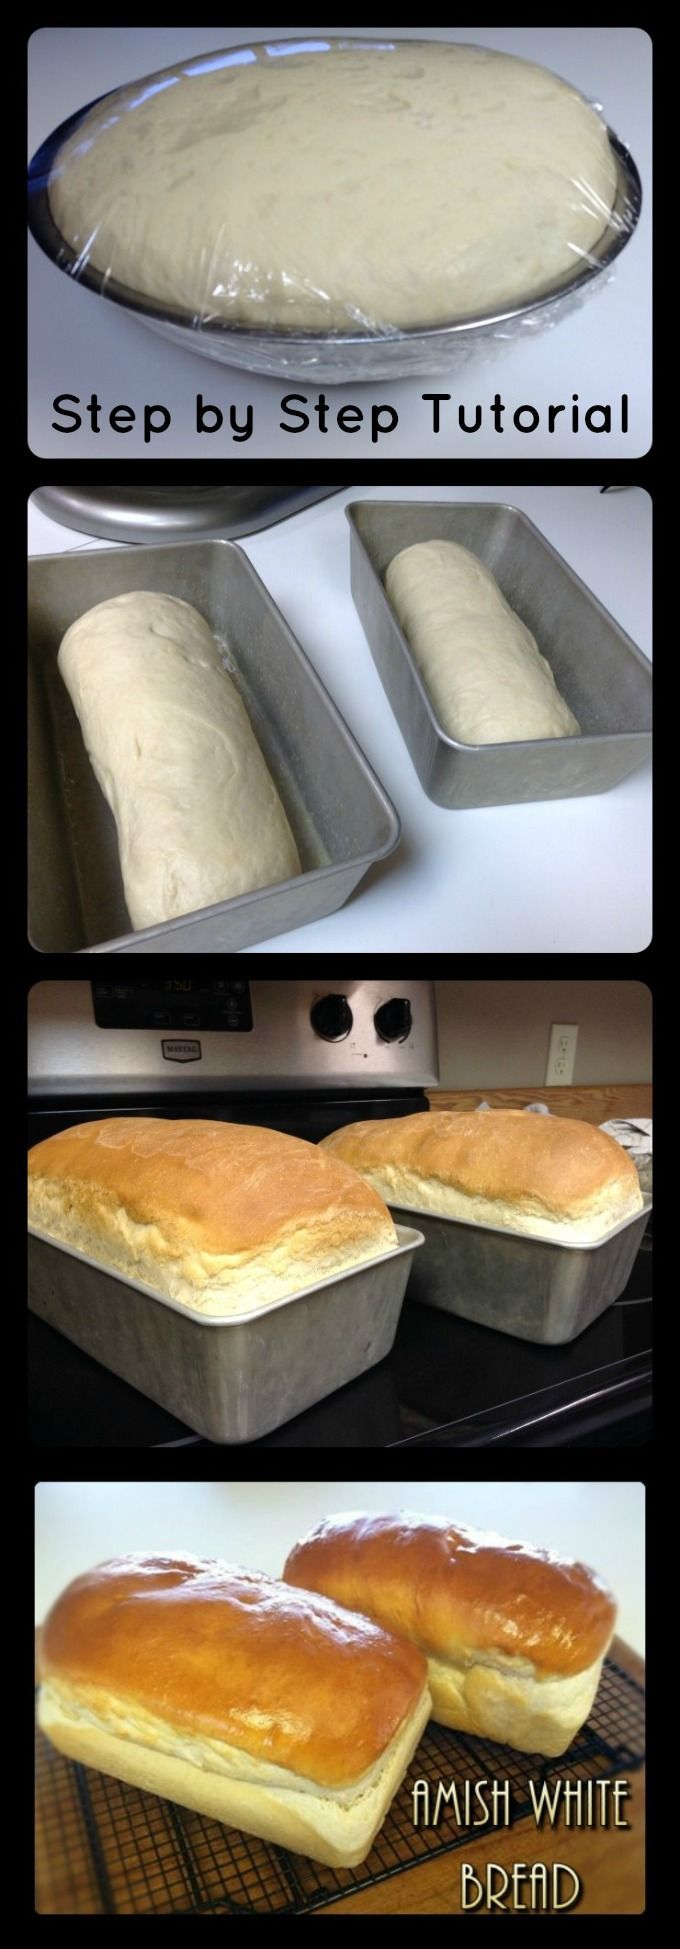 Amish White Bread Step by Step photo tutorial 6 simple ingredient and you have your own homemade bread!